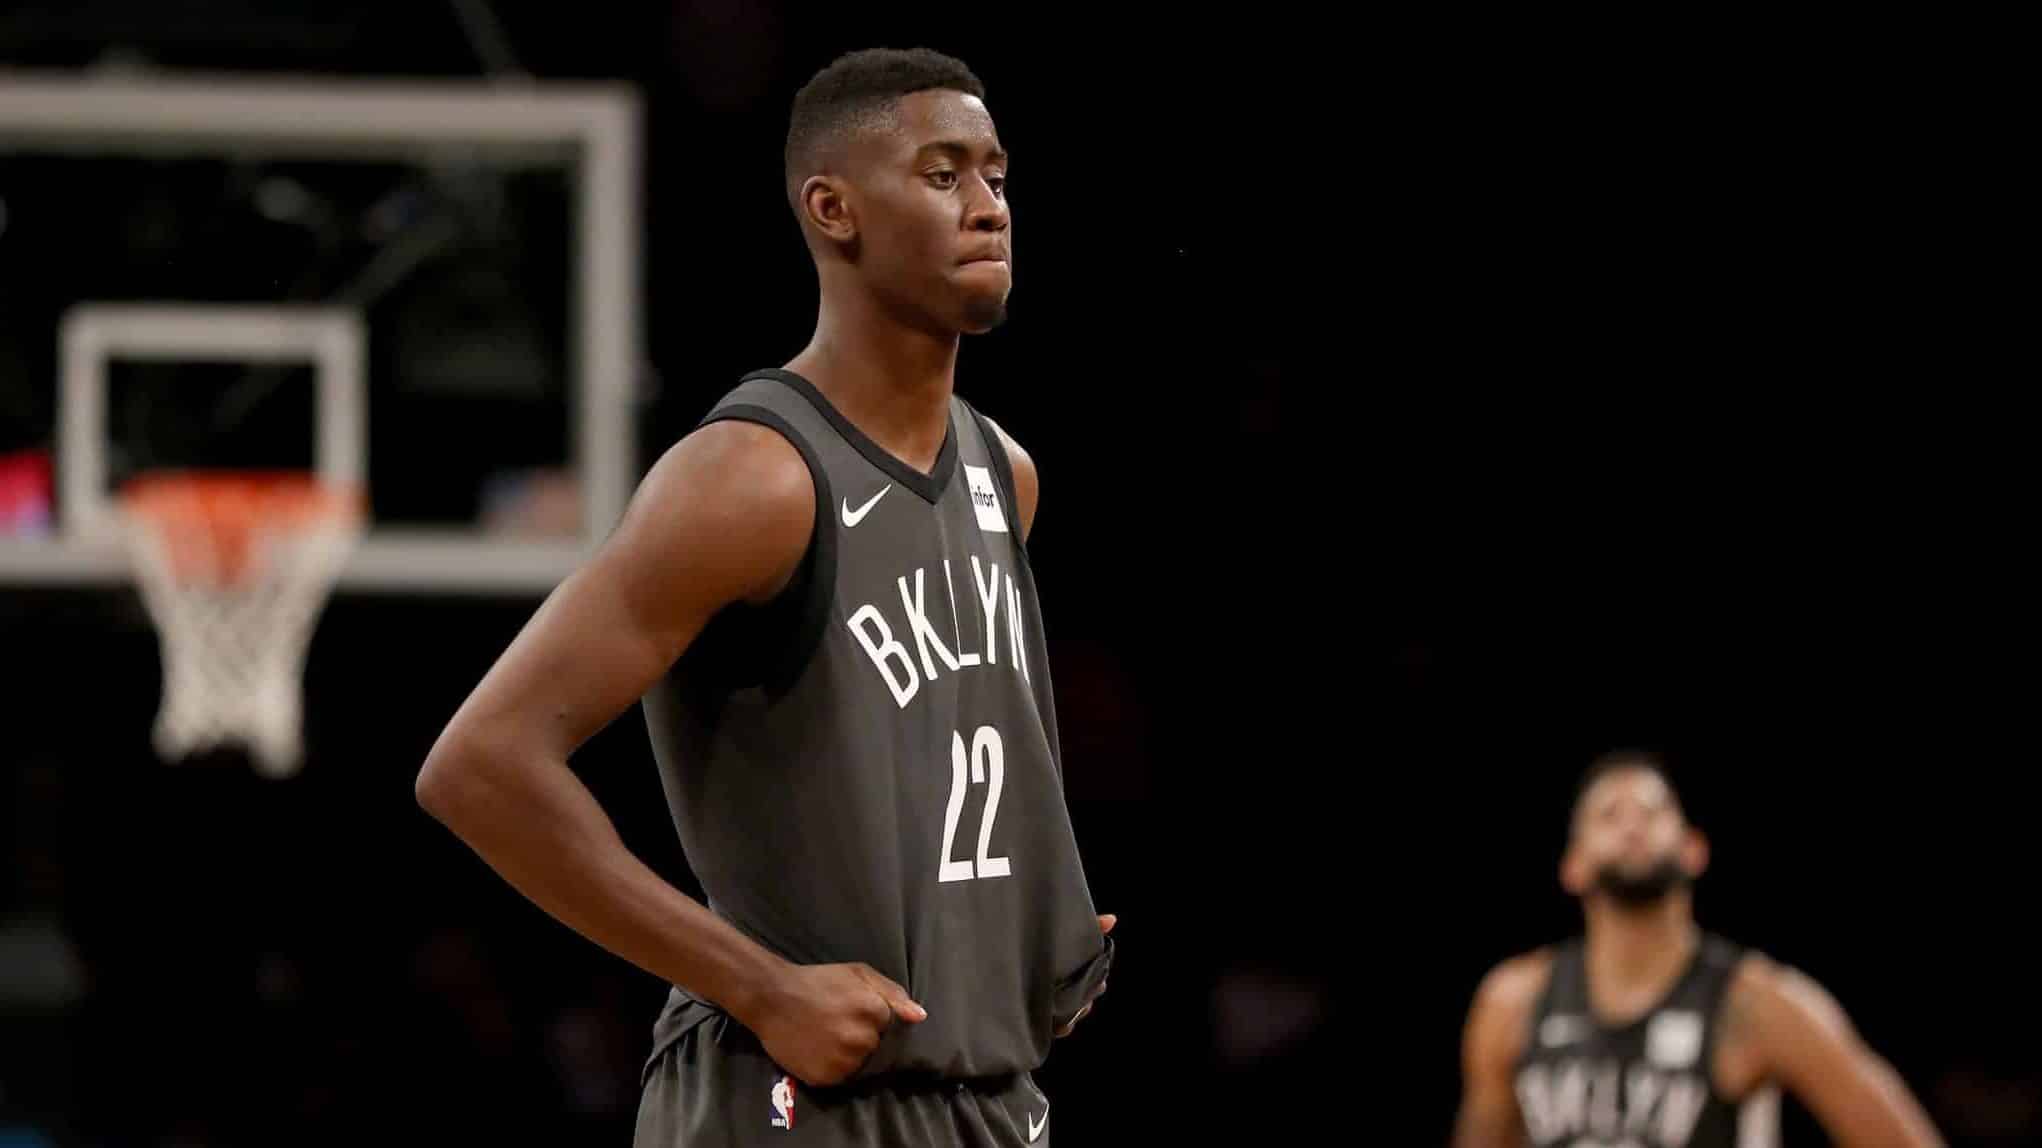 NEW YORK, NY - DECEMBER 14: Caris LeVert #22 of the Brooklyn Nets reacts to the loss to the New York Knicks at the Barclays Center on December 14, 2017 in the Brooklyn borough of New York City. NOTE TO USER: User expressly acknowledges and agrees that, by downloading and or using this Photograph, user is consenting to the terms and conditions of the Getty Images License Agreement.